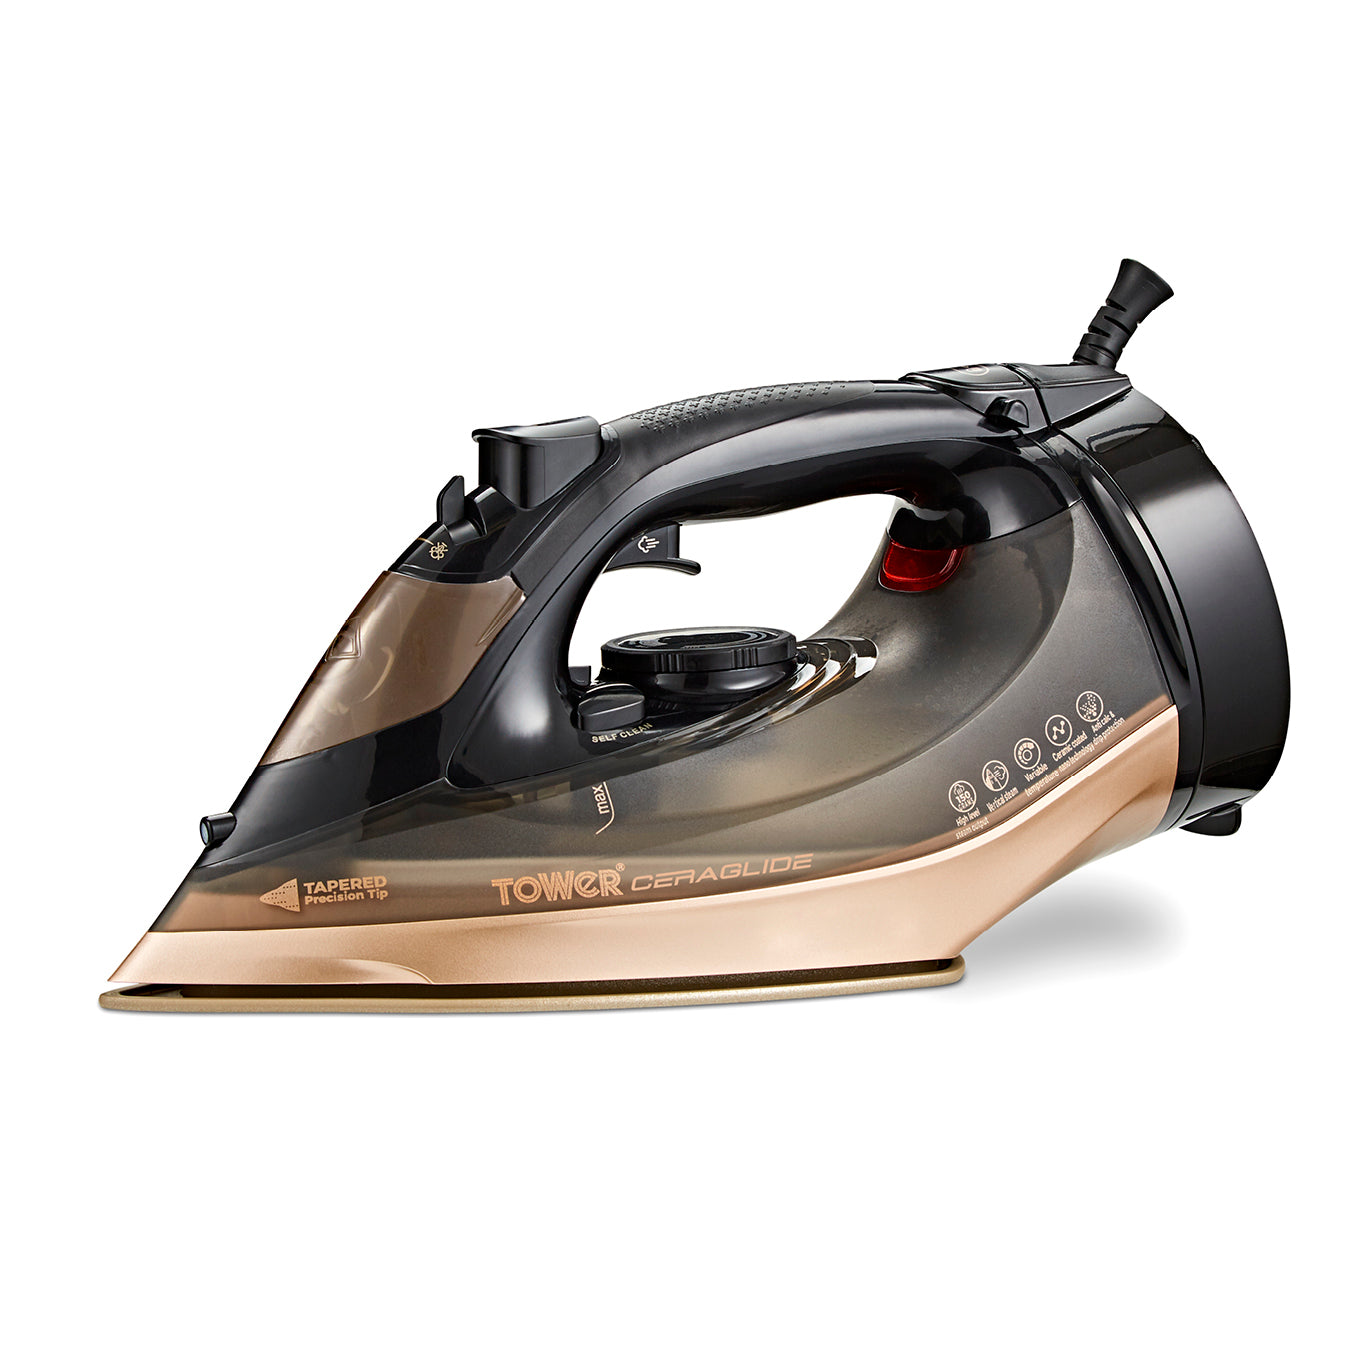 Tower Ceraglide Steam Iron 2800W 360 Cord Cordless - Black / Rose Gold